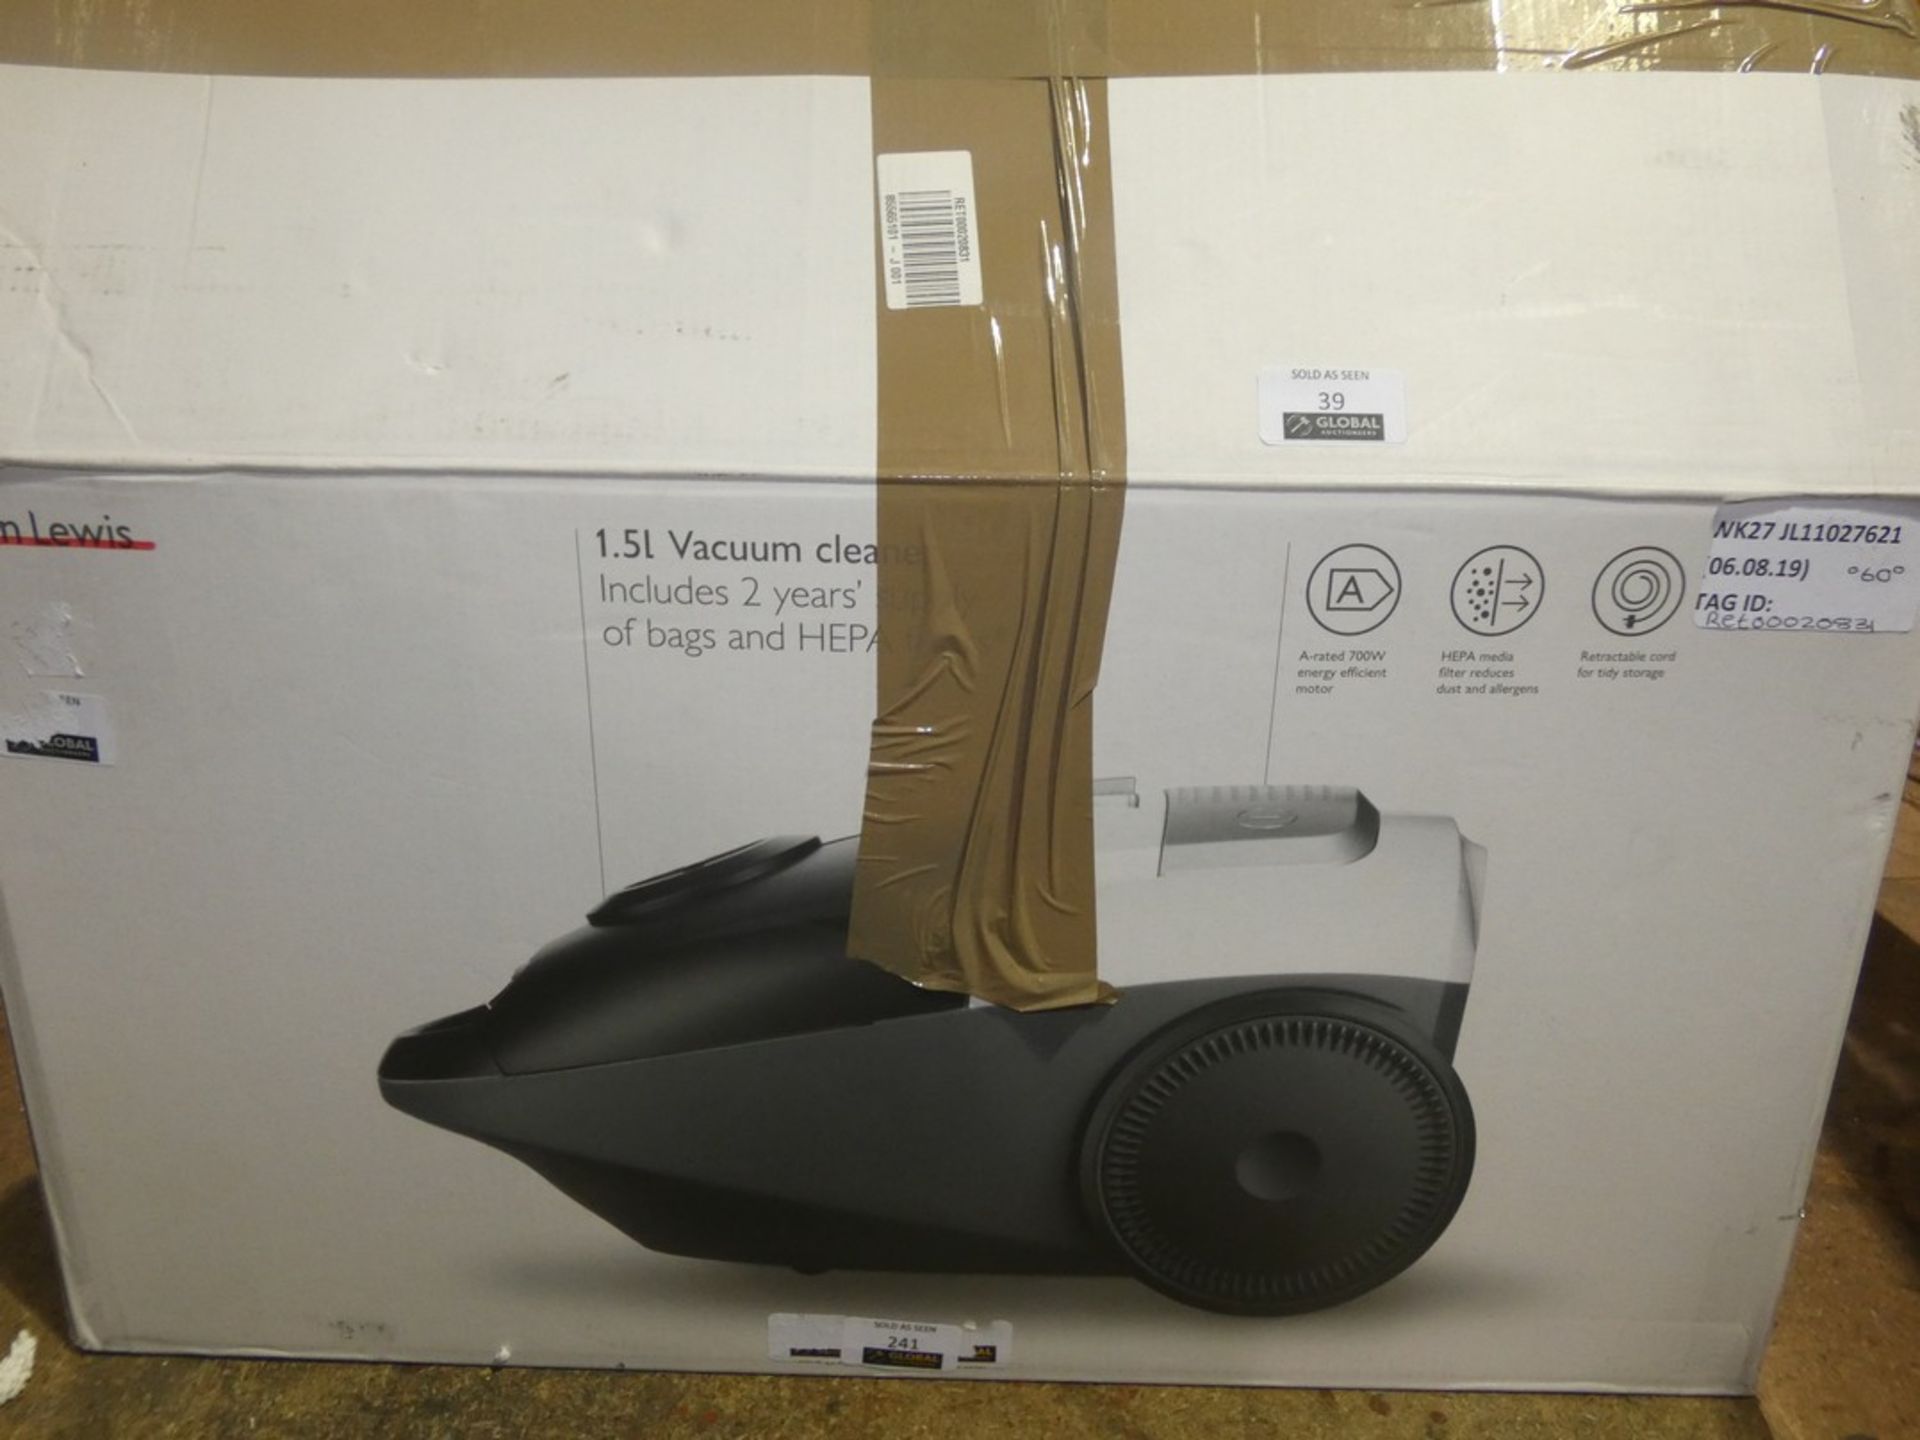 Boxed John Lewis And Partners 1.5 Litre Cylinder Vacuum Cleaner RRP £60 (RET00020831) (Public